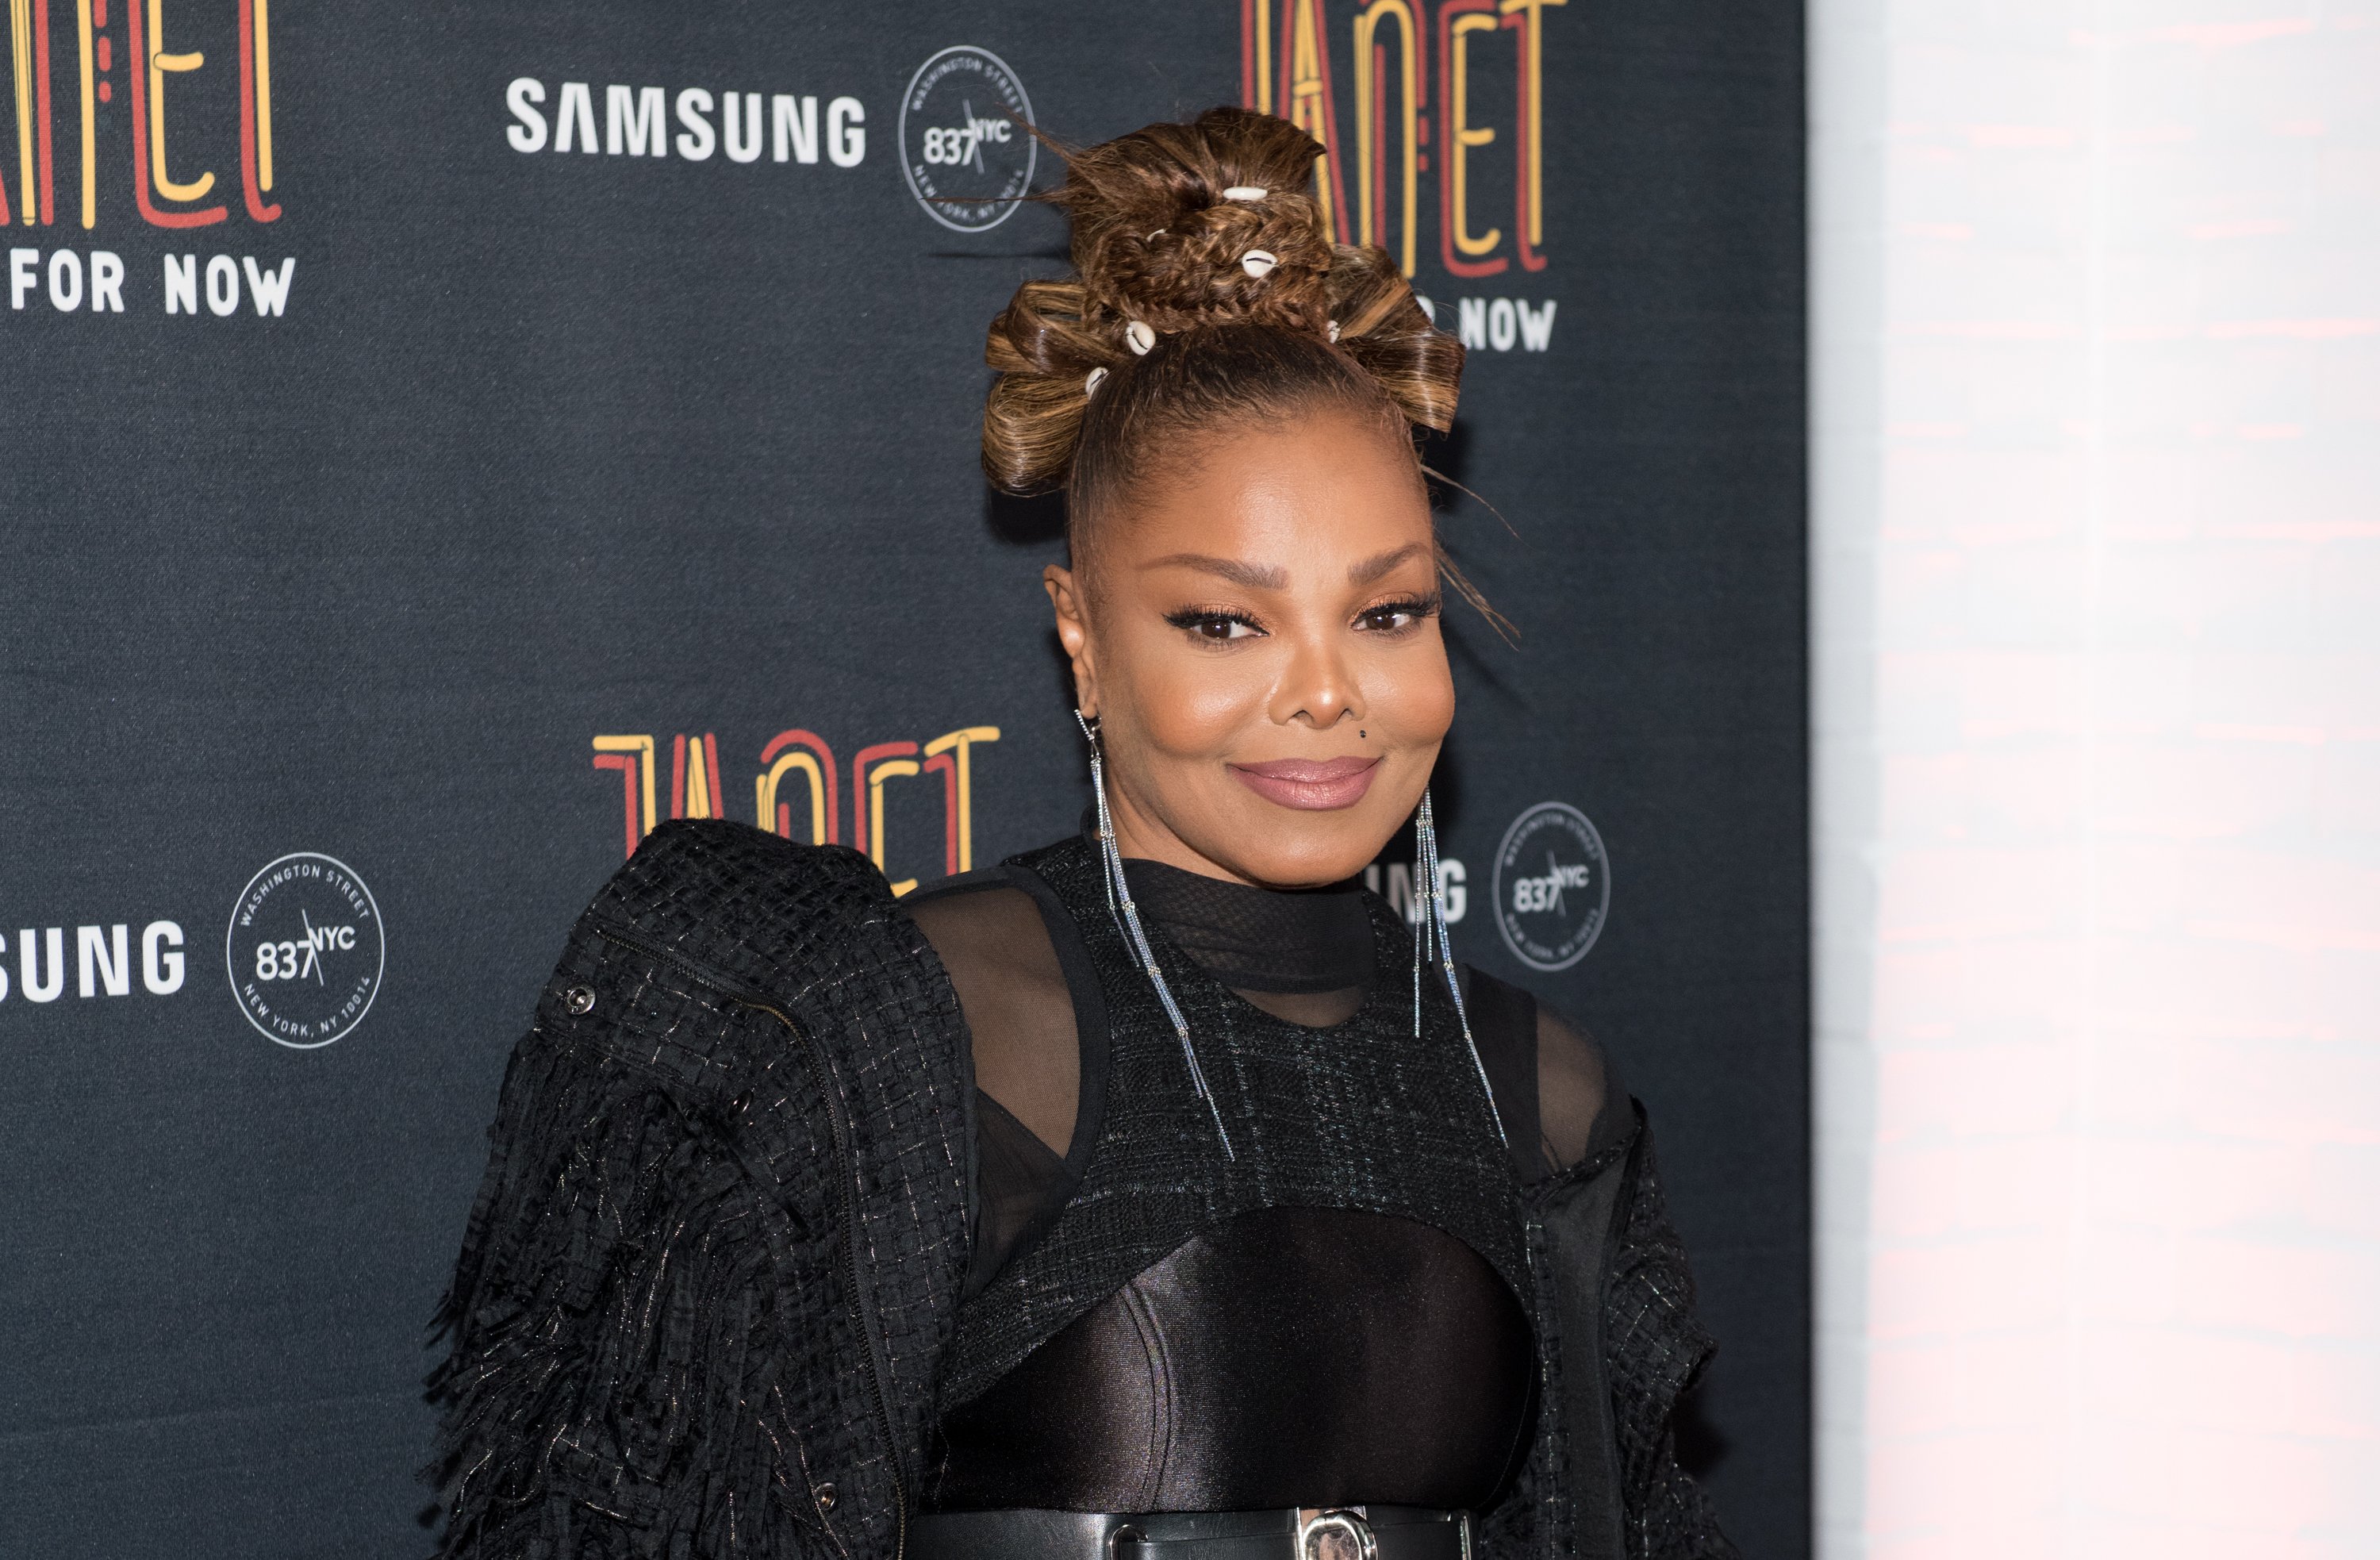 Janet Jackson attends the "Made For Now" release party at Samsung 837 on August 17, 2018. | Photo: GettyImages